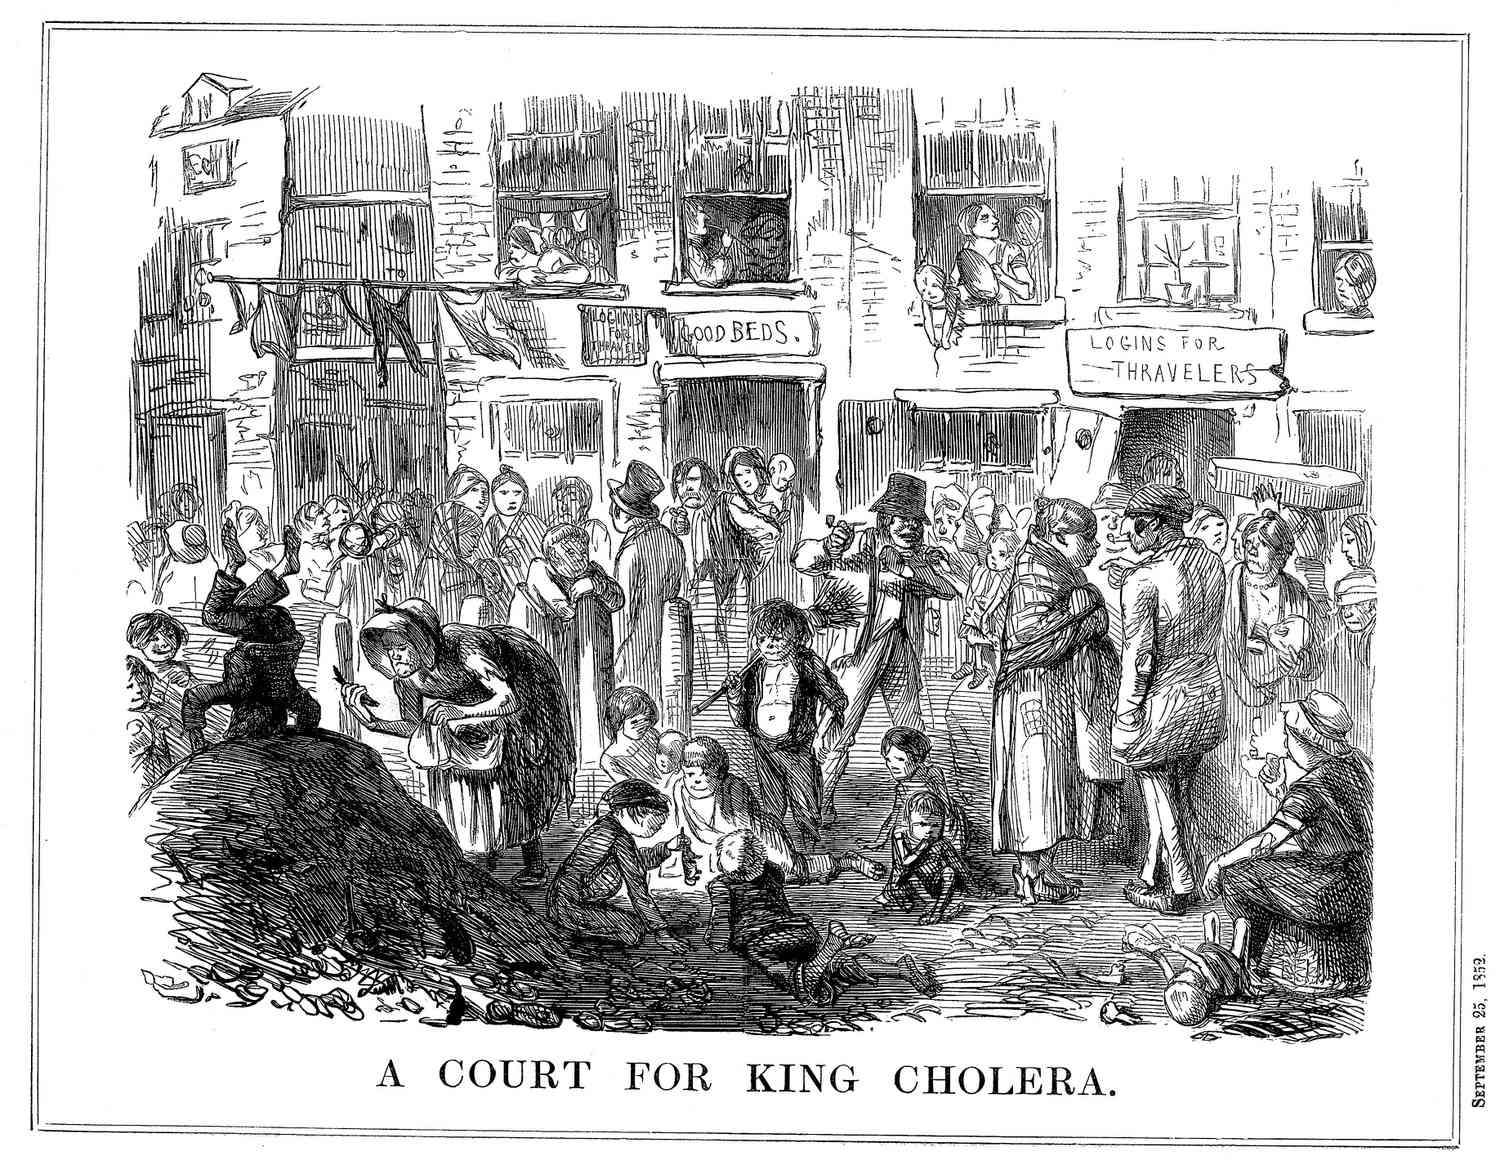 Death in the Time of Cholera